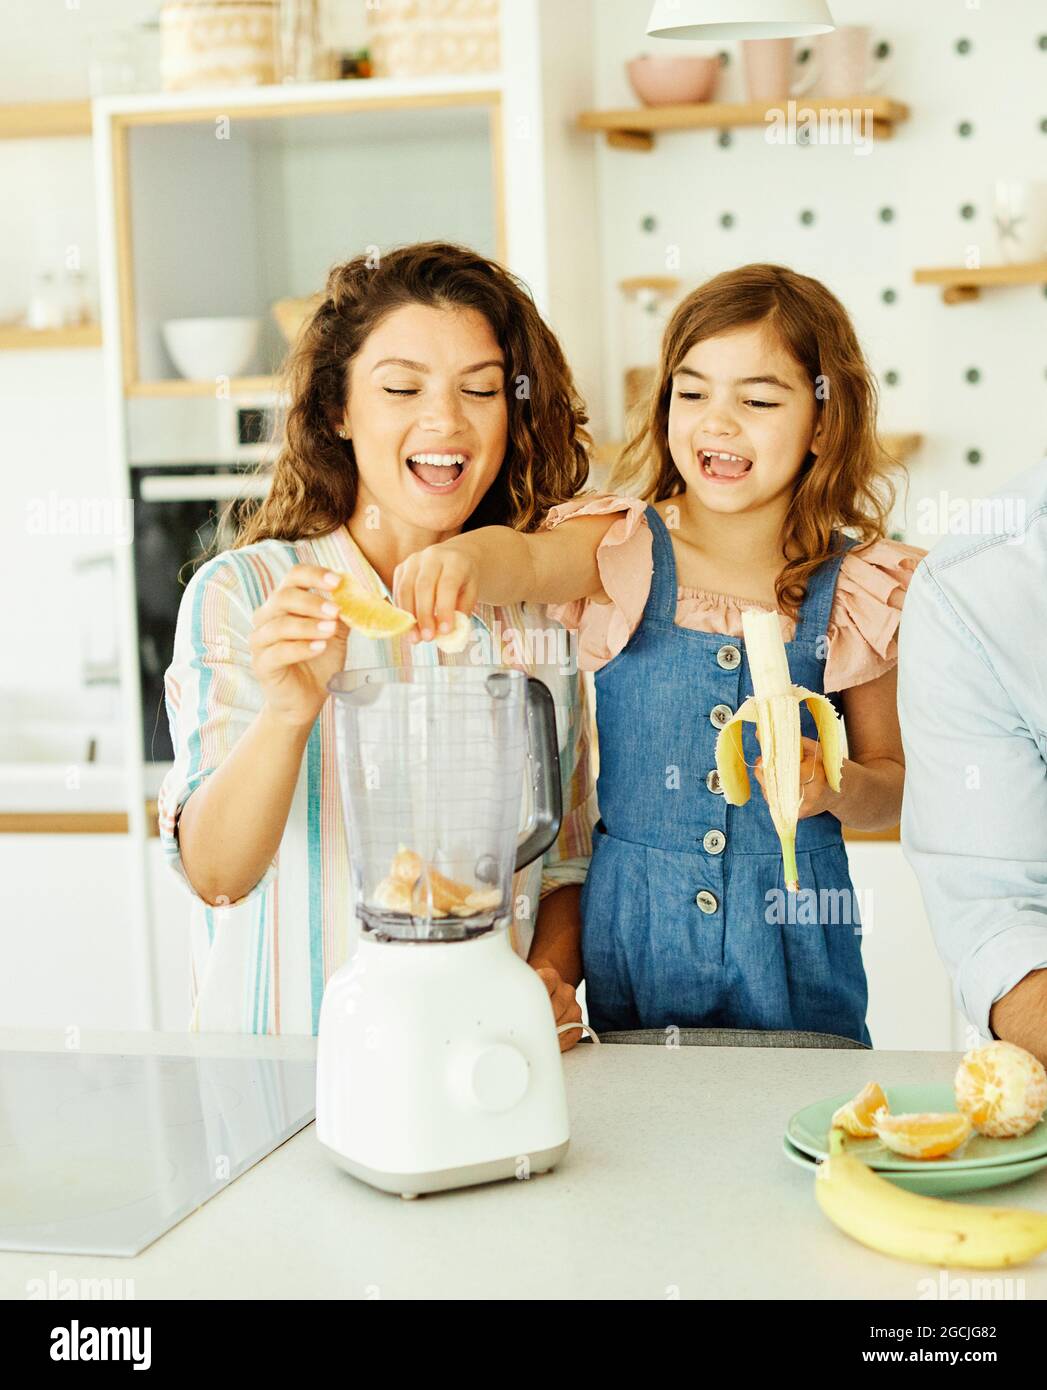 family child kitchen food daughter mother fruit smoothie juice breakfast happy together Stock Photo